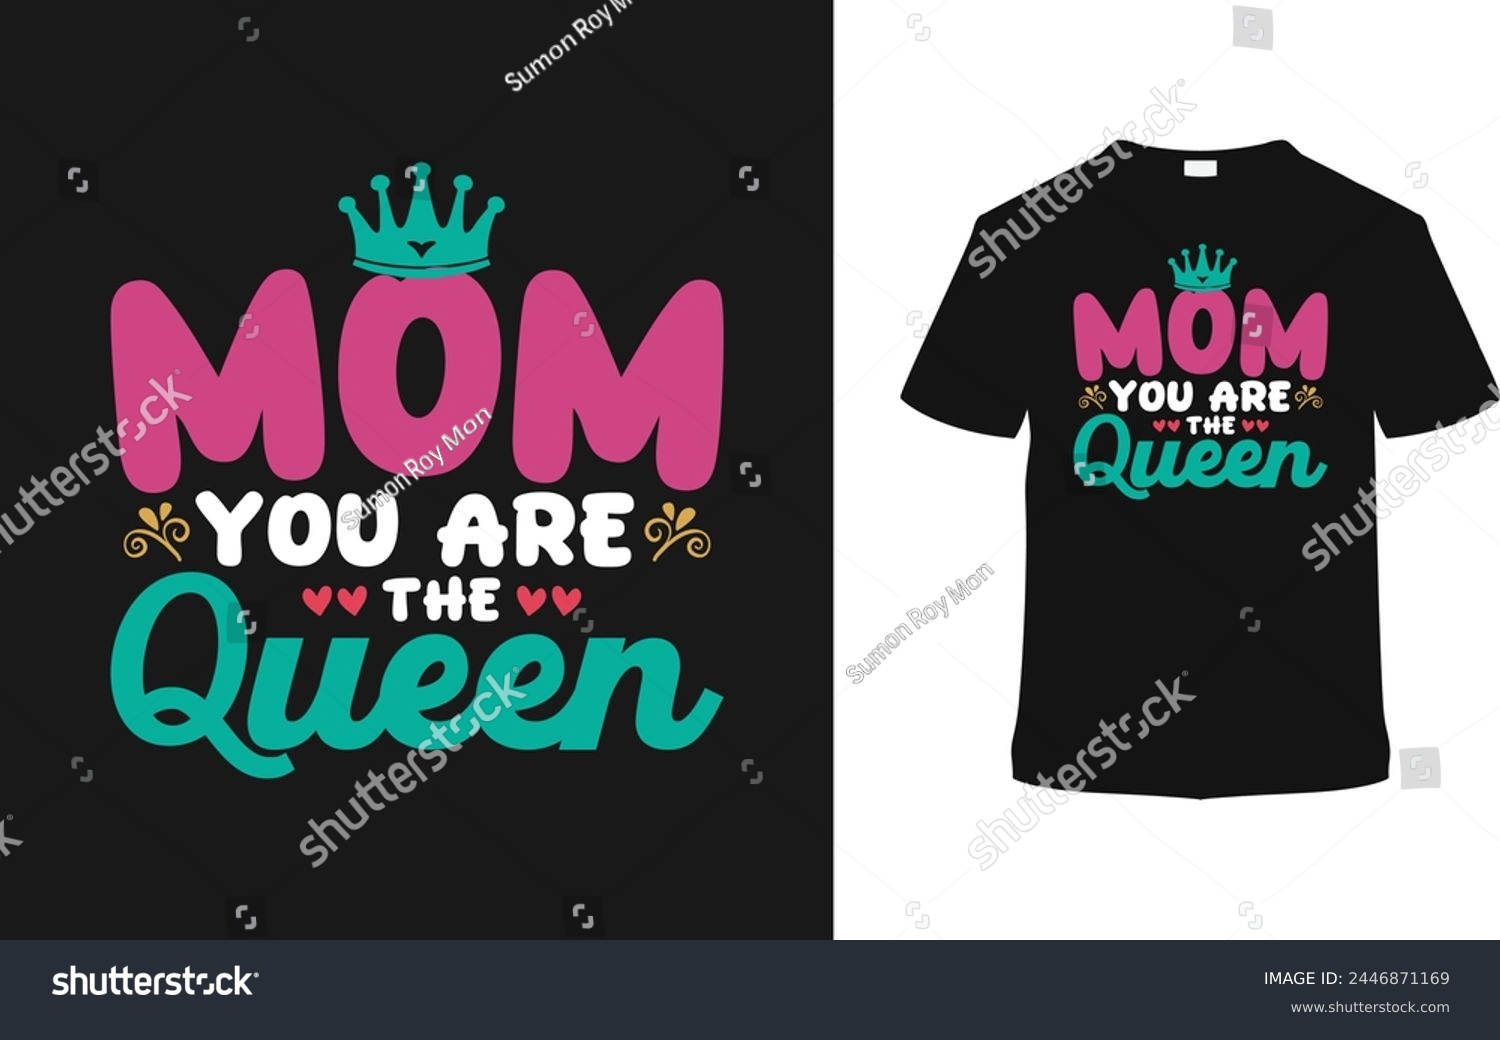 SVG of Mom You Are The Queen Mother's Day T shirt Design, vector illustration, graphic template, print on demand, typography, vintage, eps 10, textile fabrics, retro style, element, apparel, mom tee svg